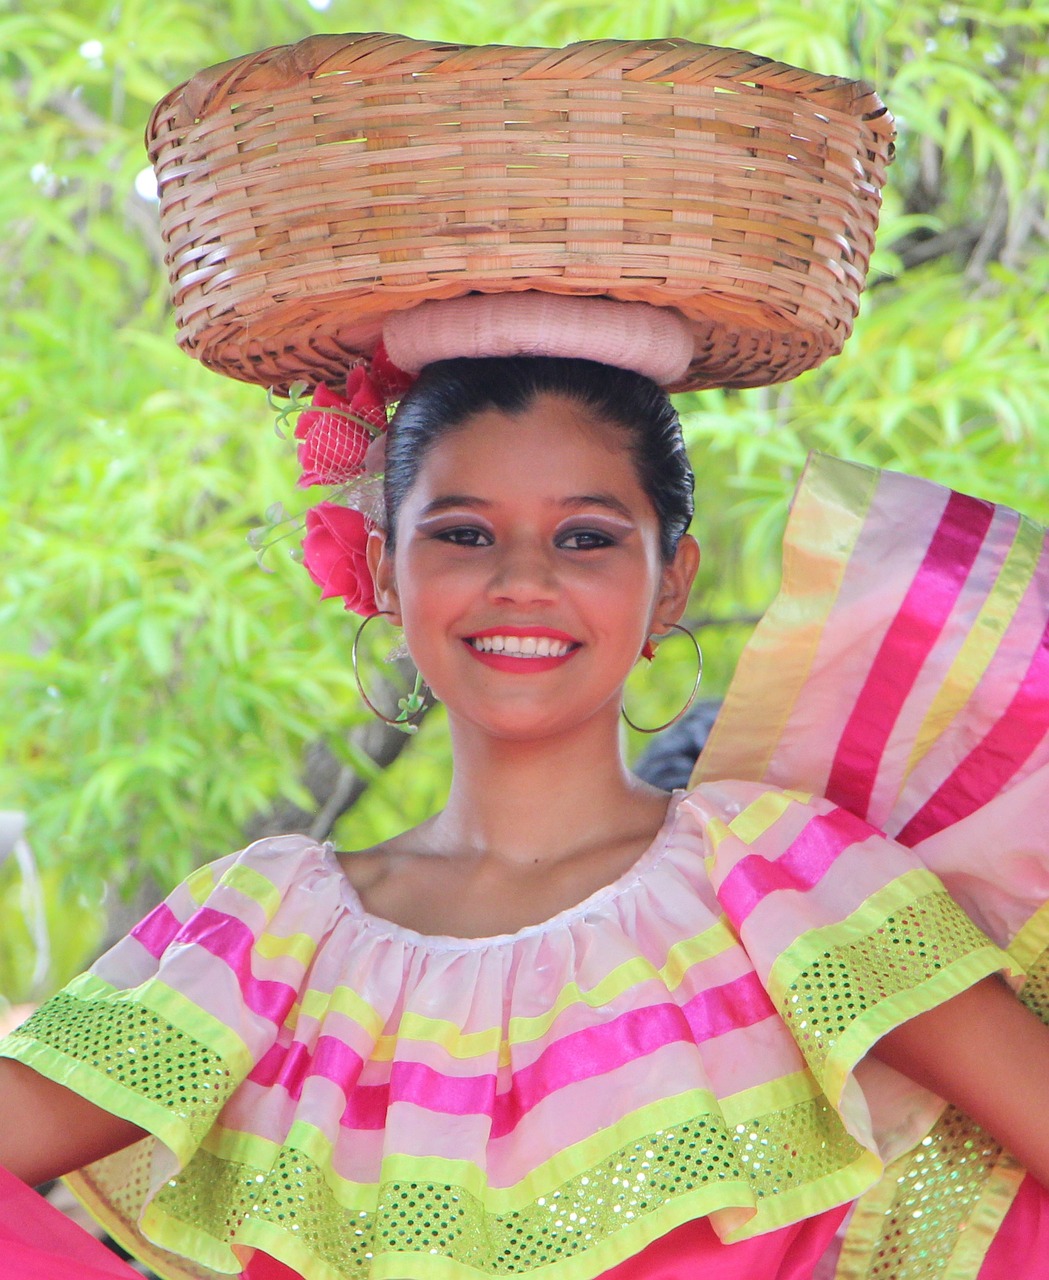 nicaragua folklore youth free photo